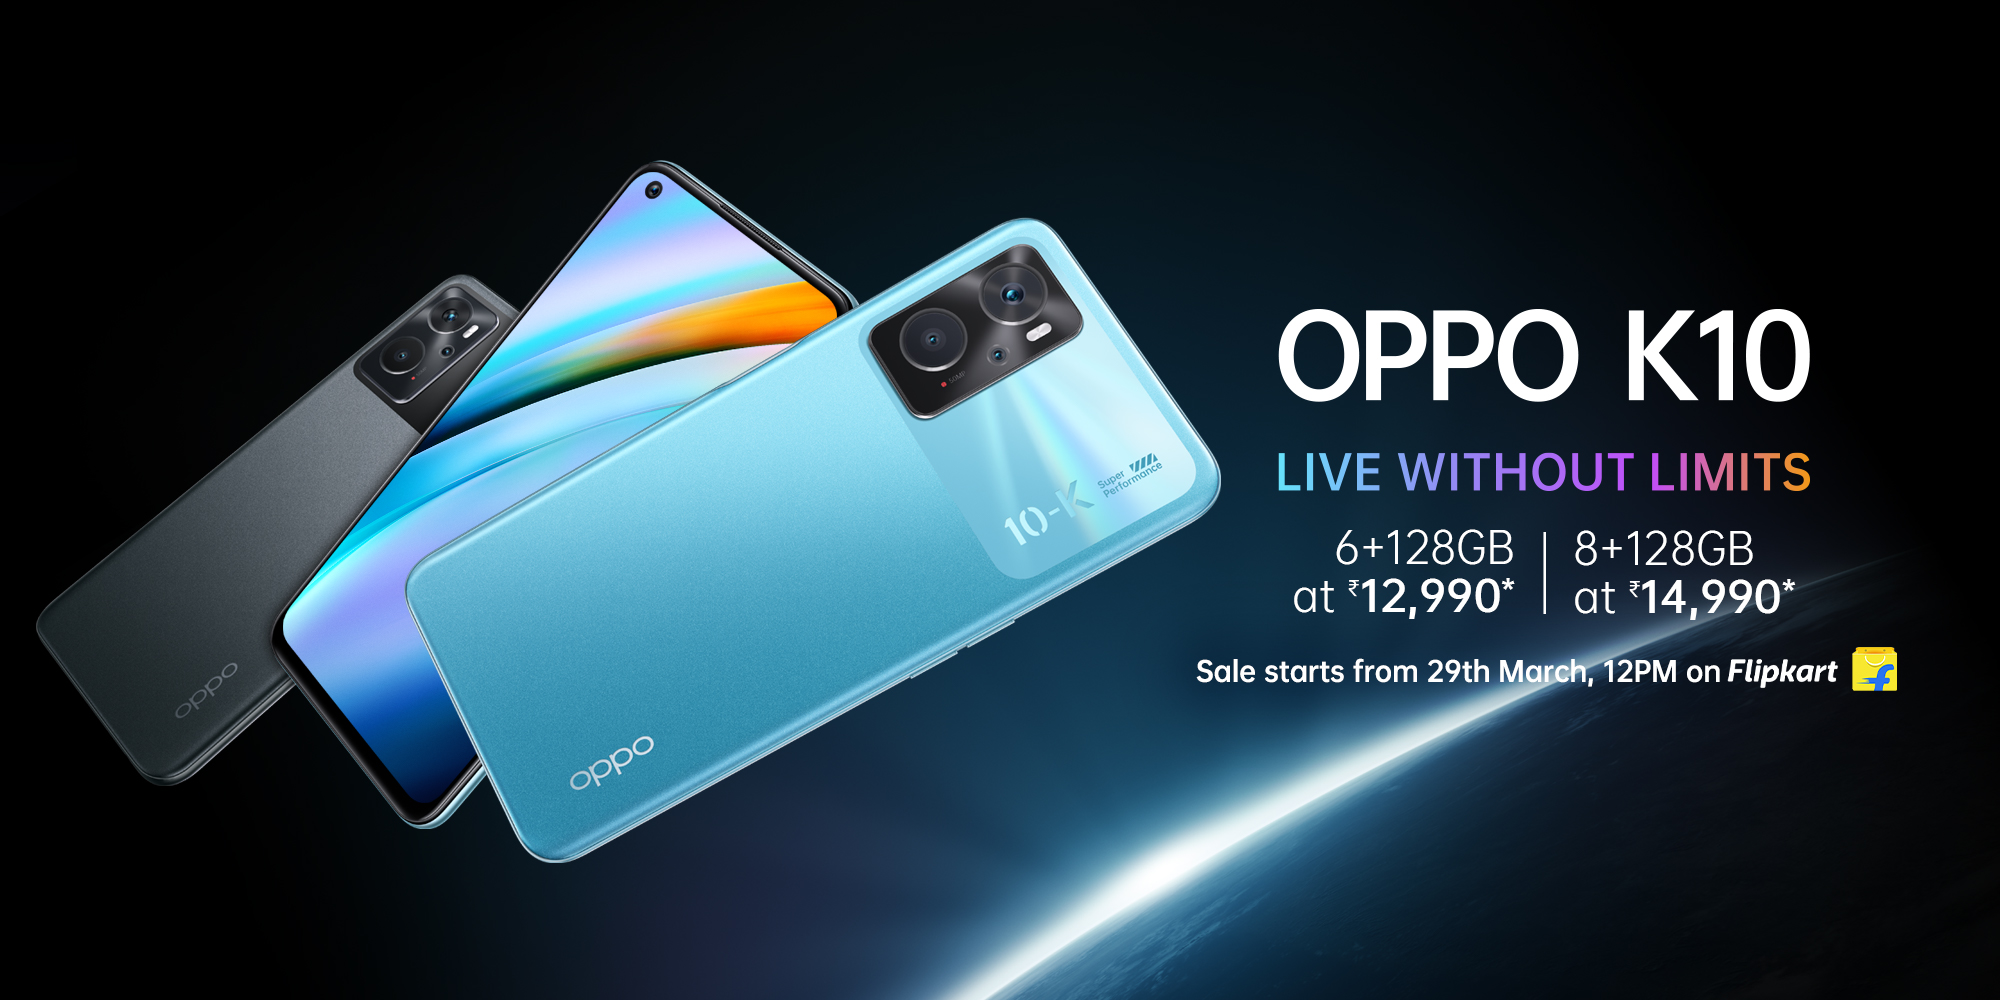 Snapdragon 680 powered OPPO K10 announced with $195 price tag oppo new K10 smartphone